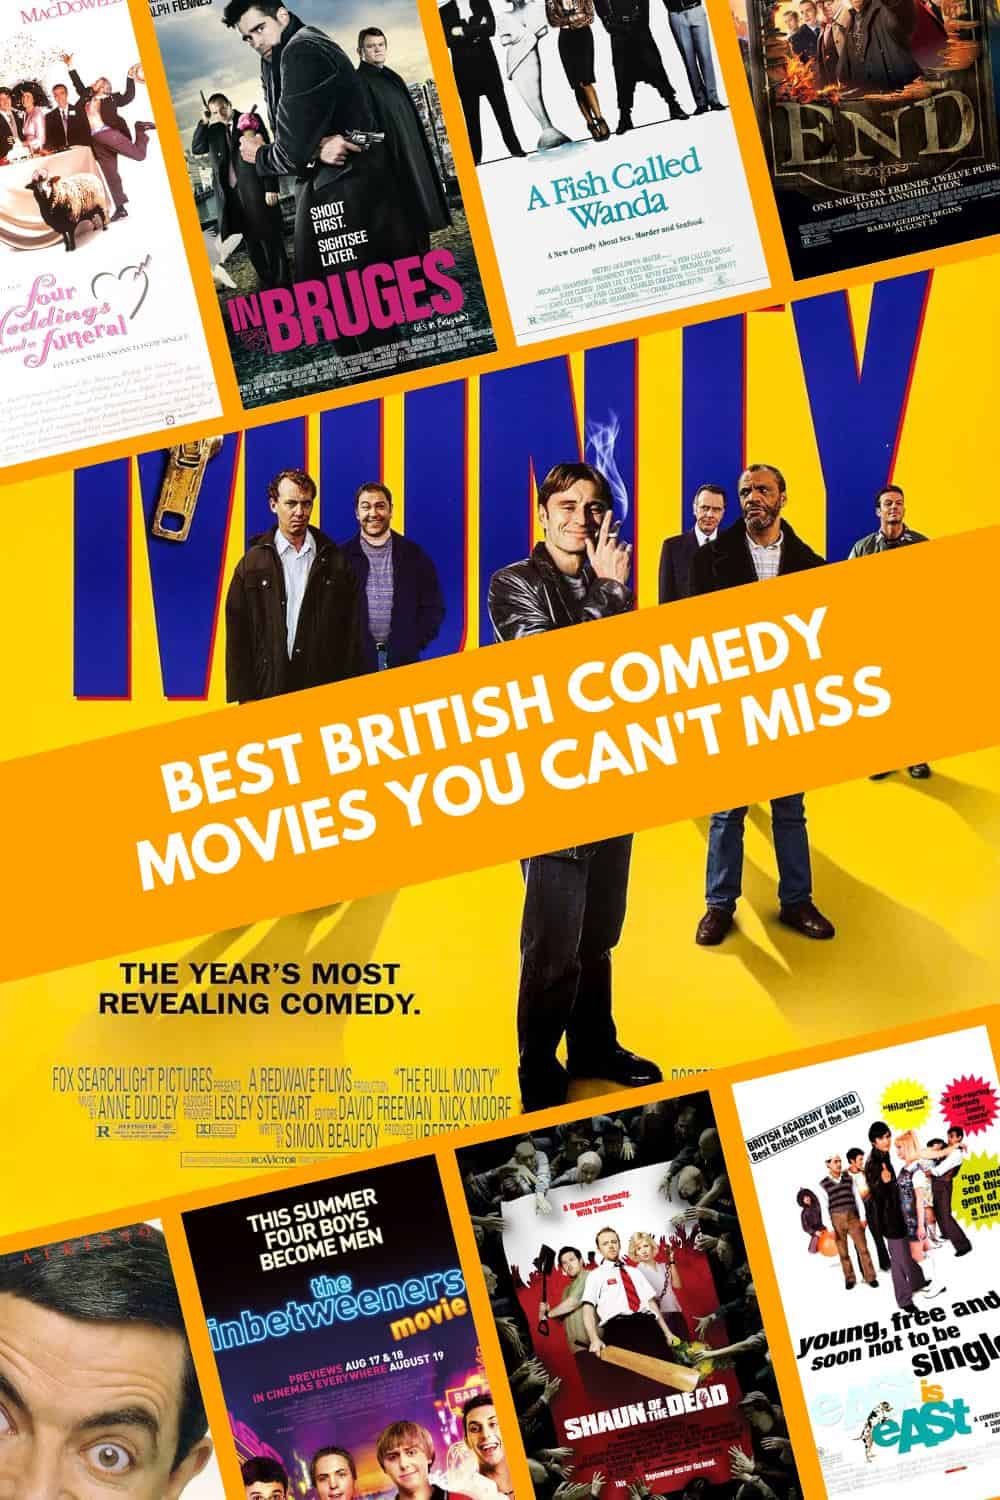 British Comedy Movies You Can't Miss